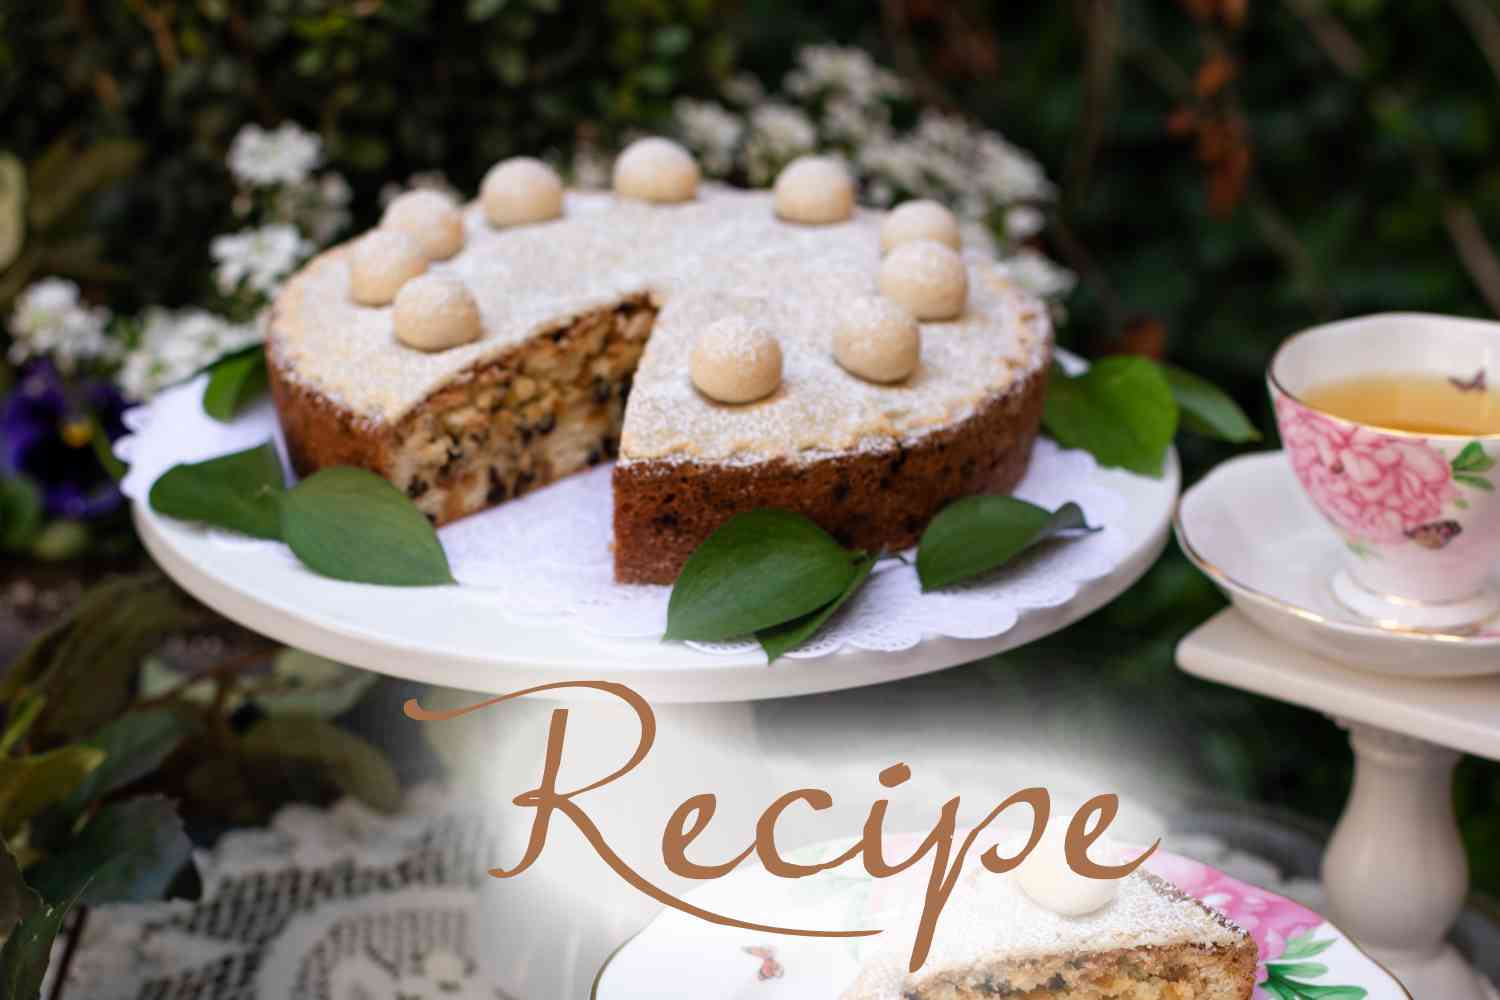 Simnel Cake Recipe for Mother's Day with Historical Story